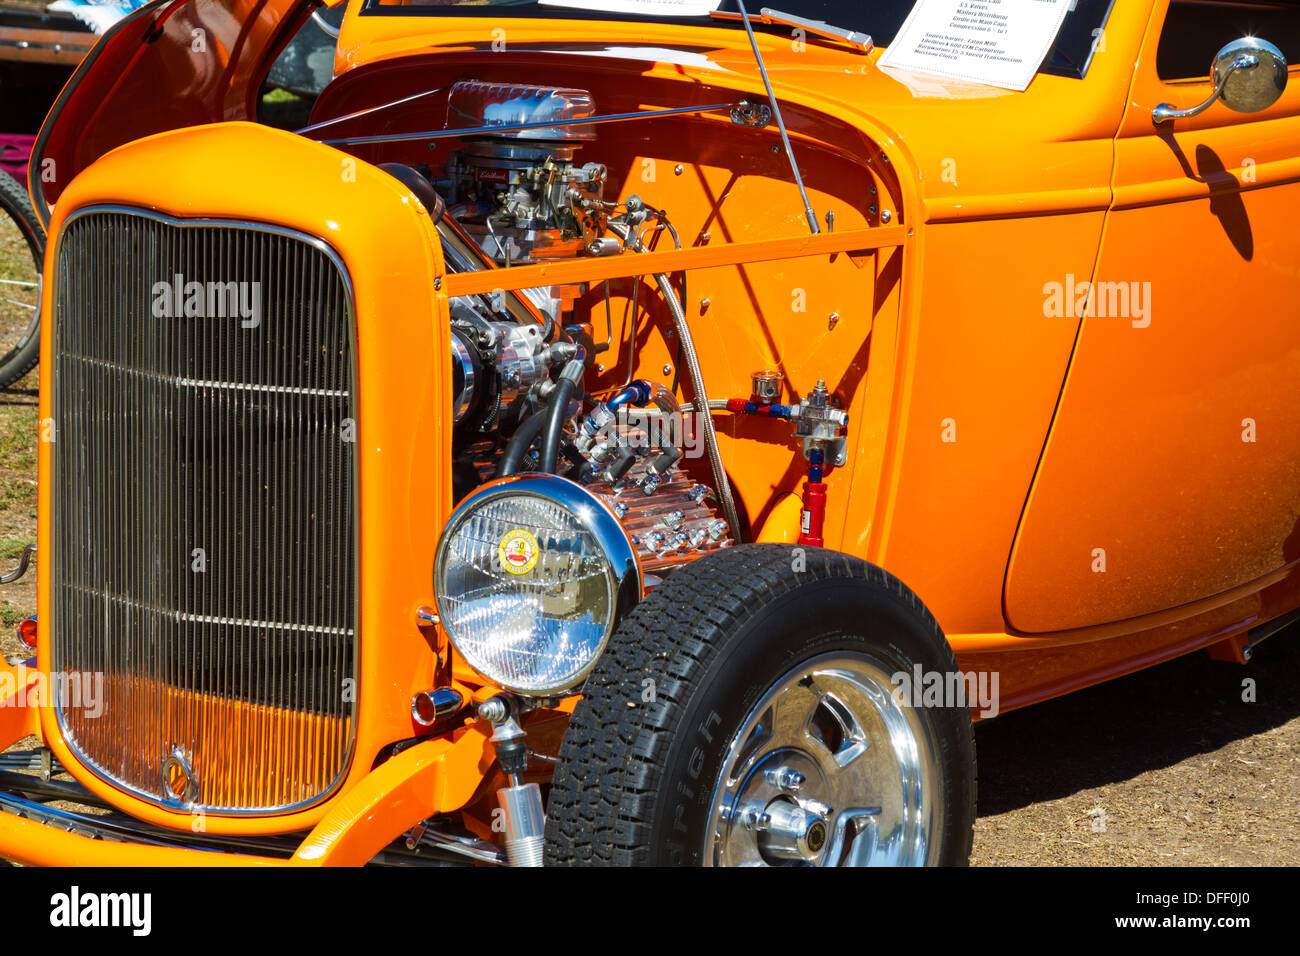 A beautiful bright orange 1932 Ford hot-rod showing engine detail. Stock Photo